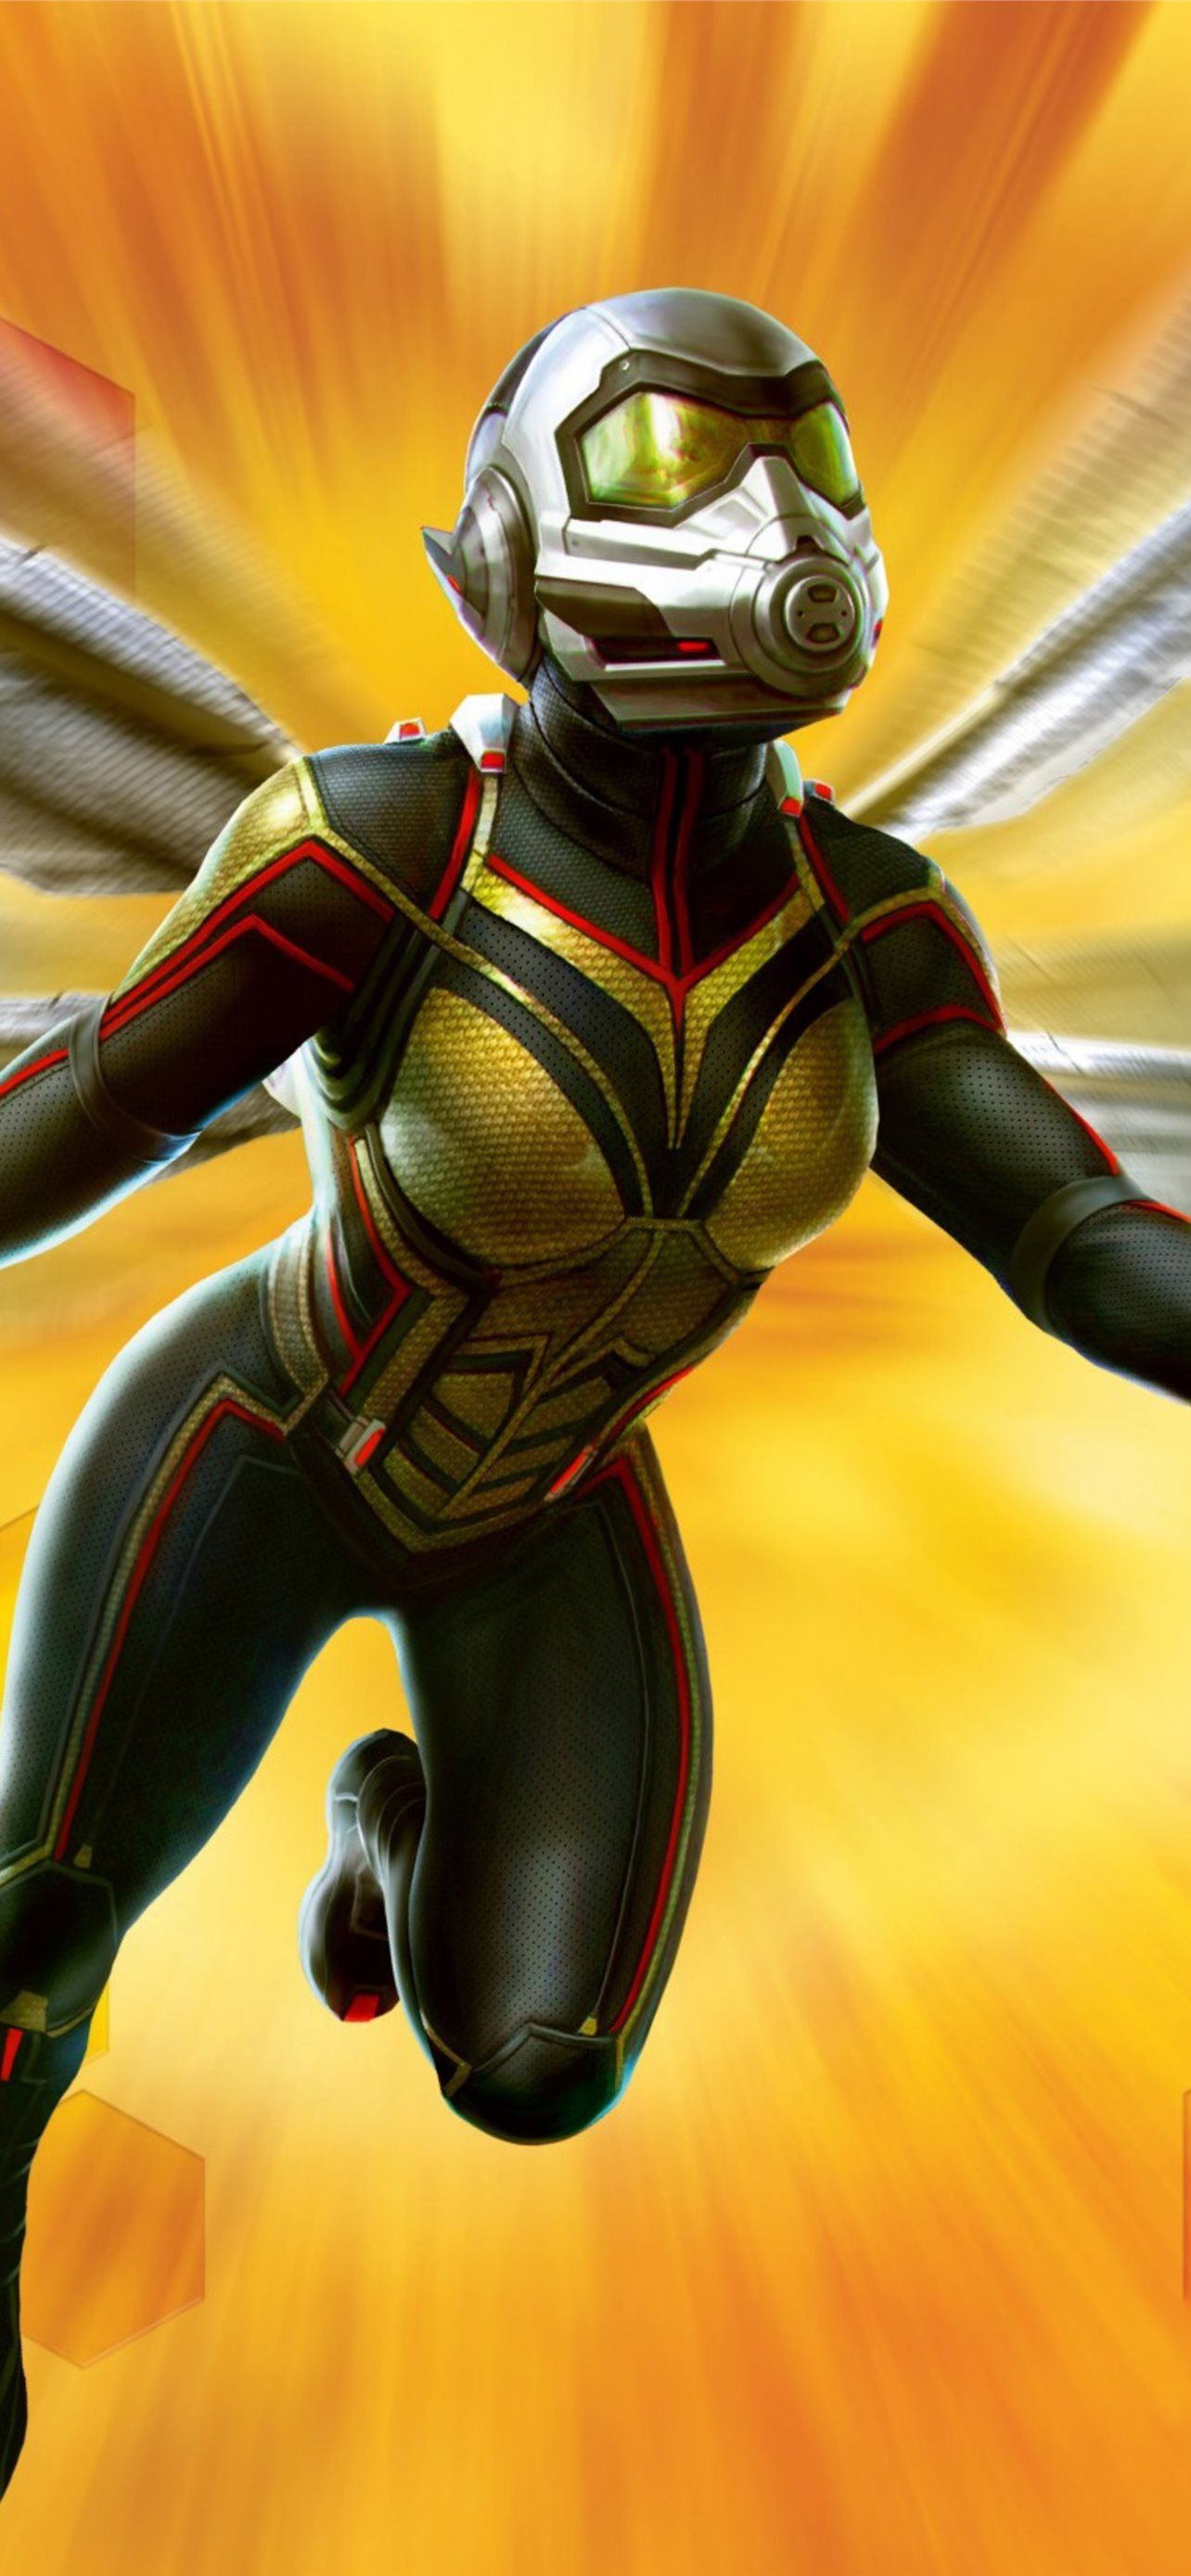 Wasp Wallpapers